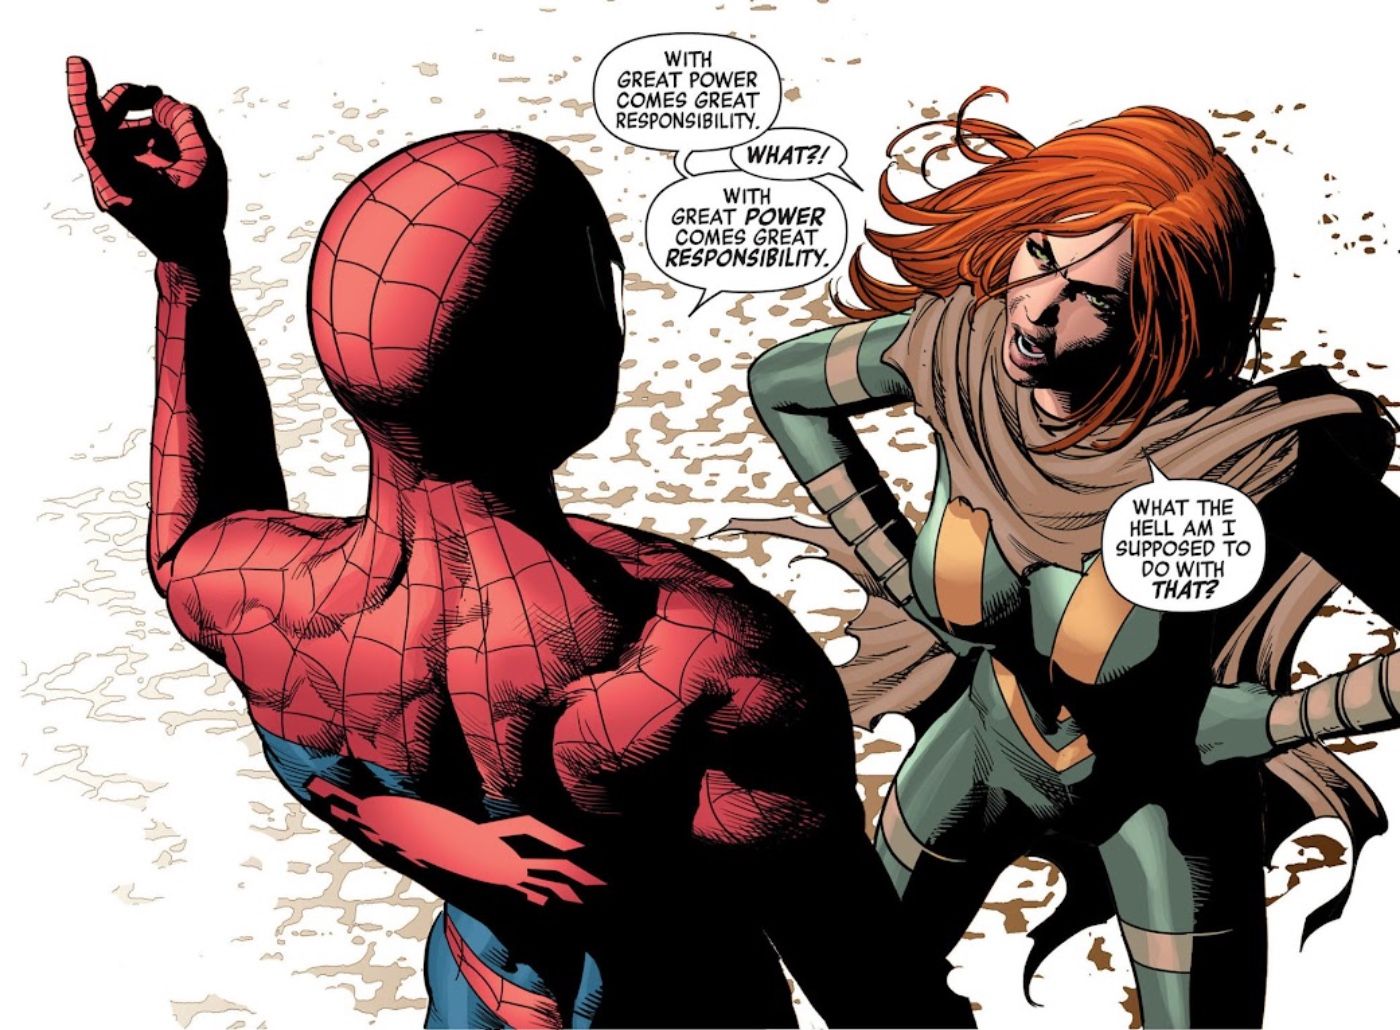 Marvel Admits There’s One Big Problem with Spider-Man’s Iconic Motto